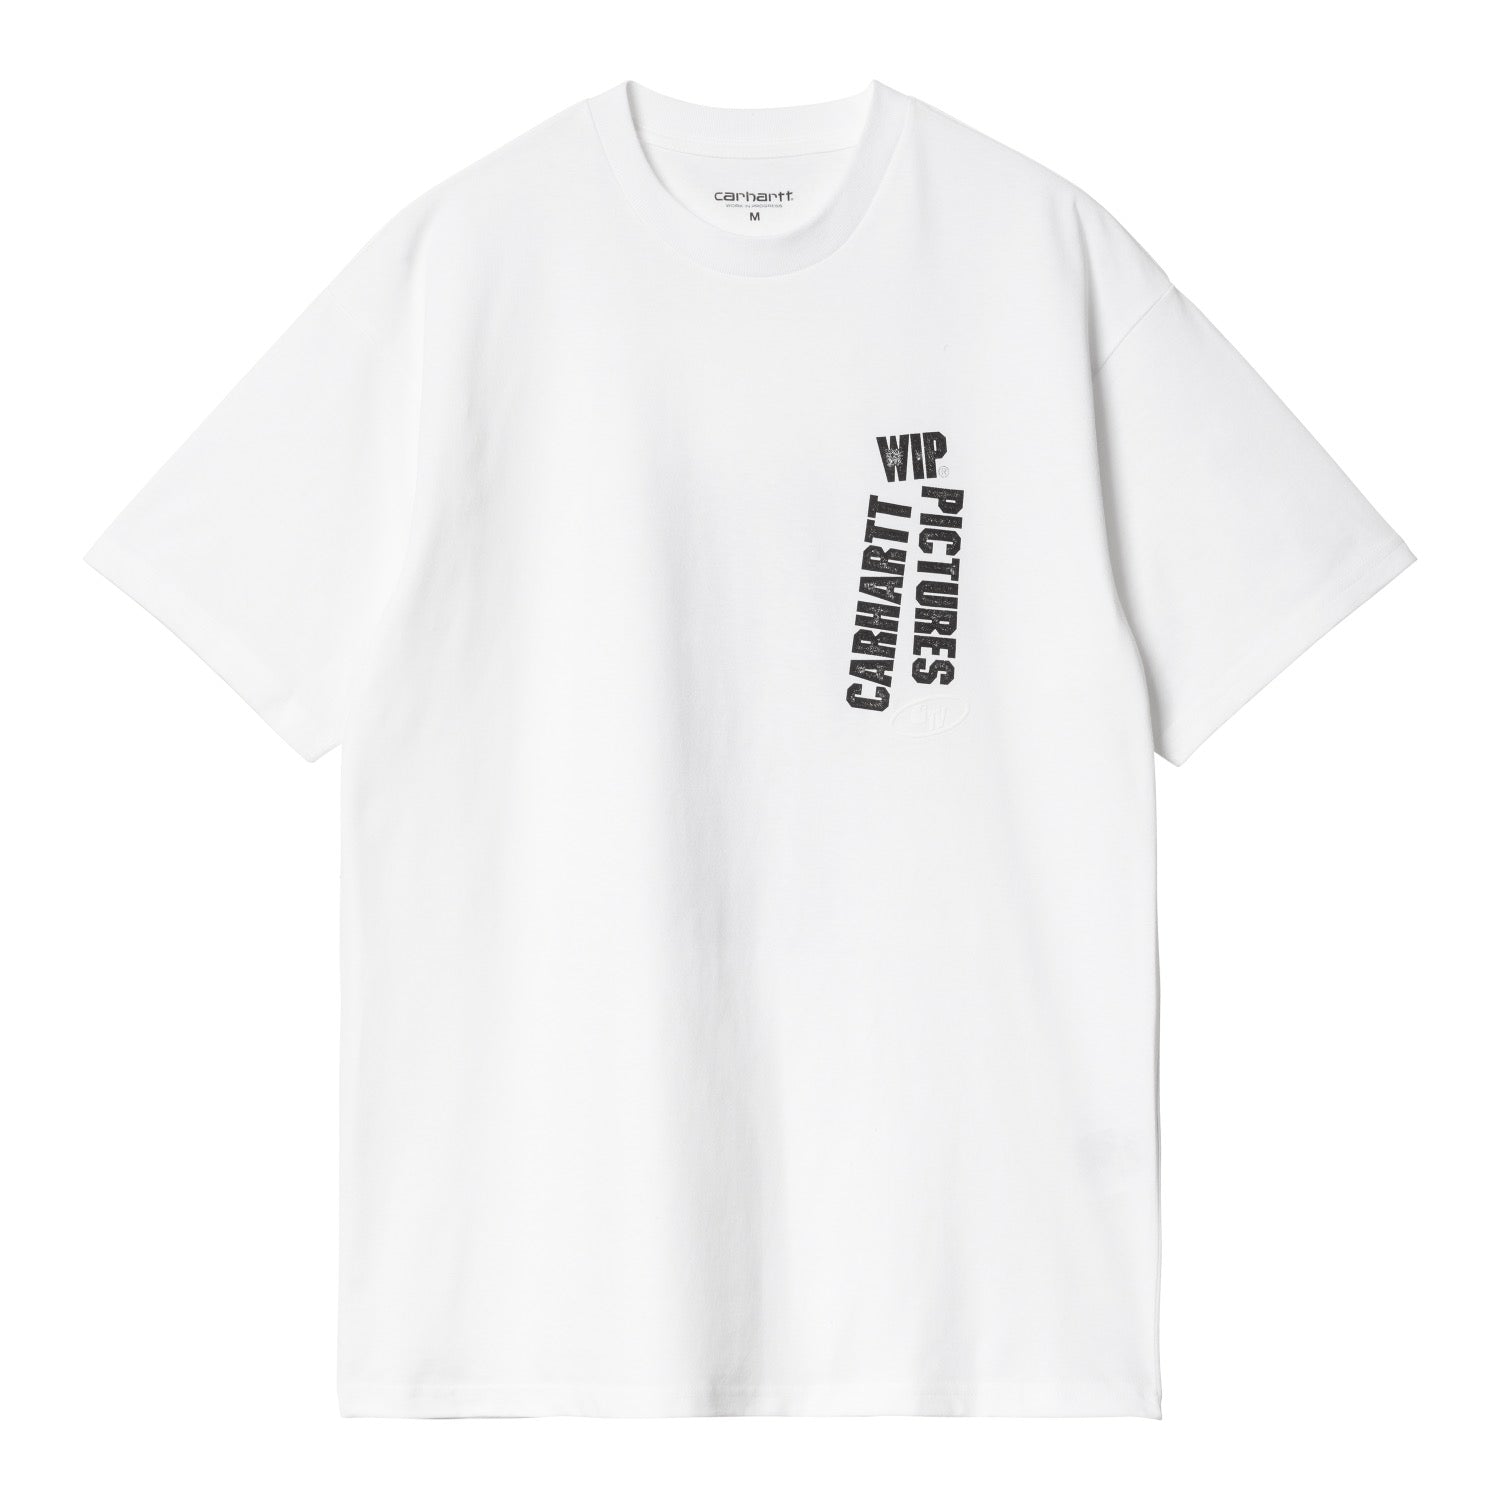 S/S WIP PICTURES T-SHIRT - White